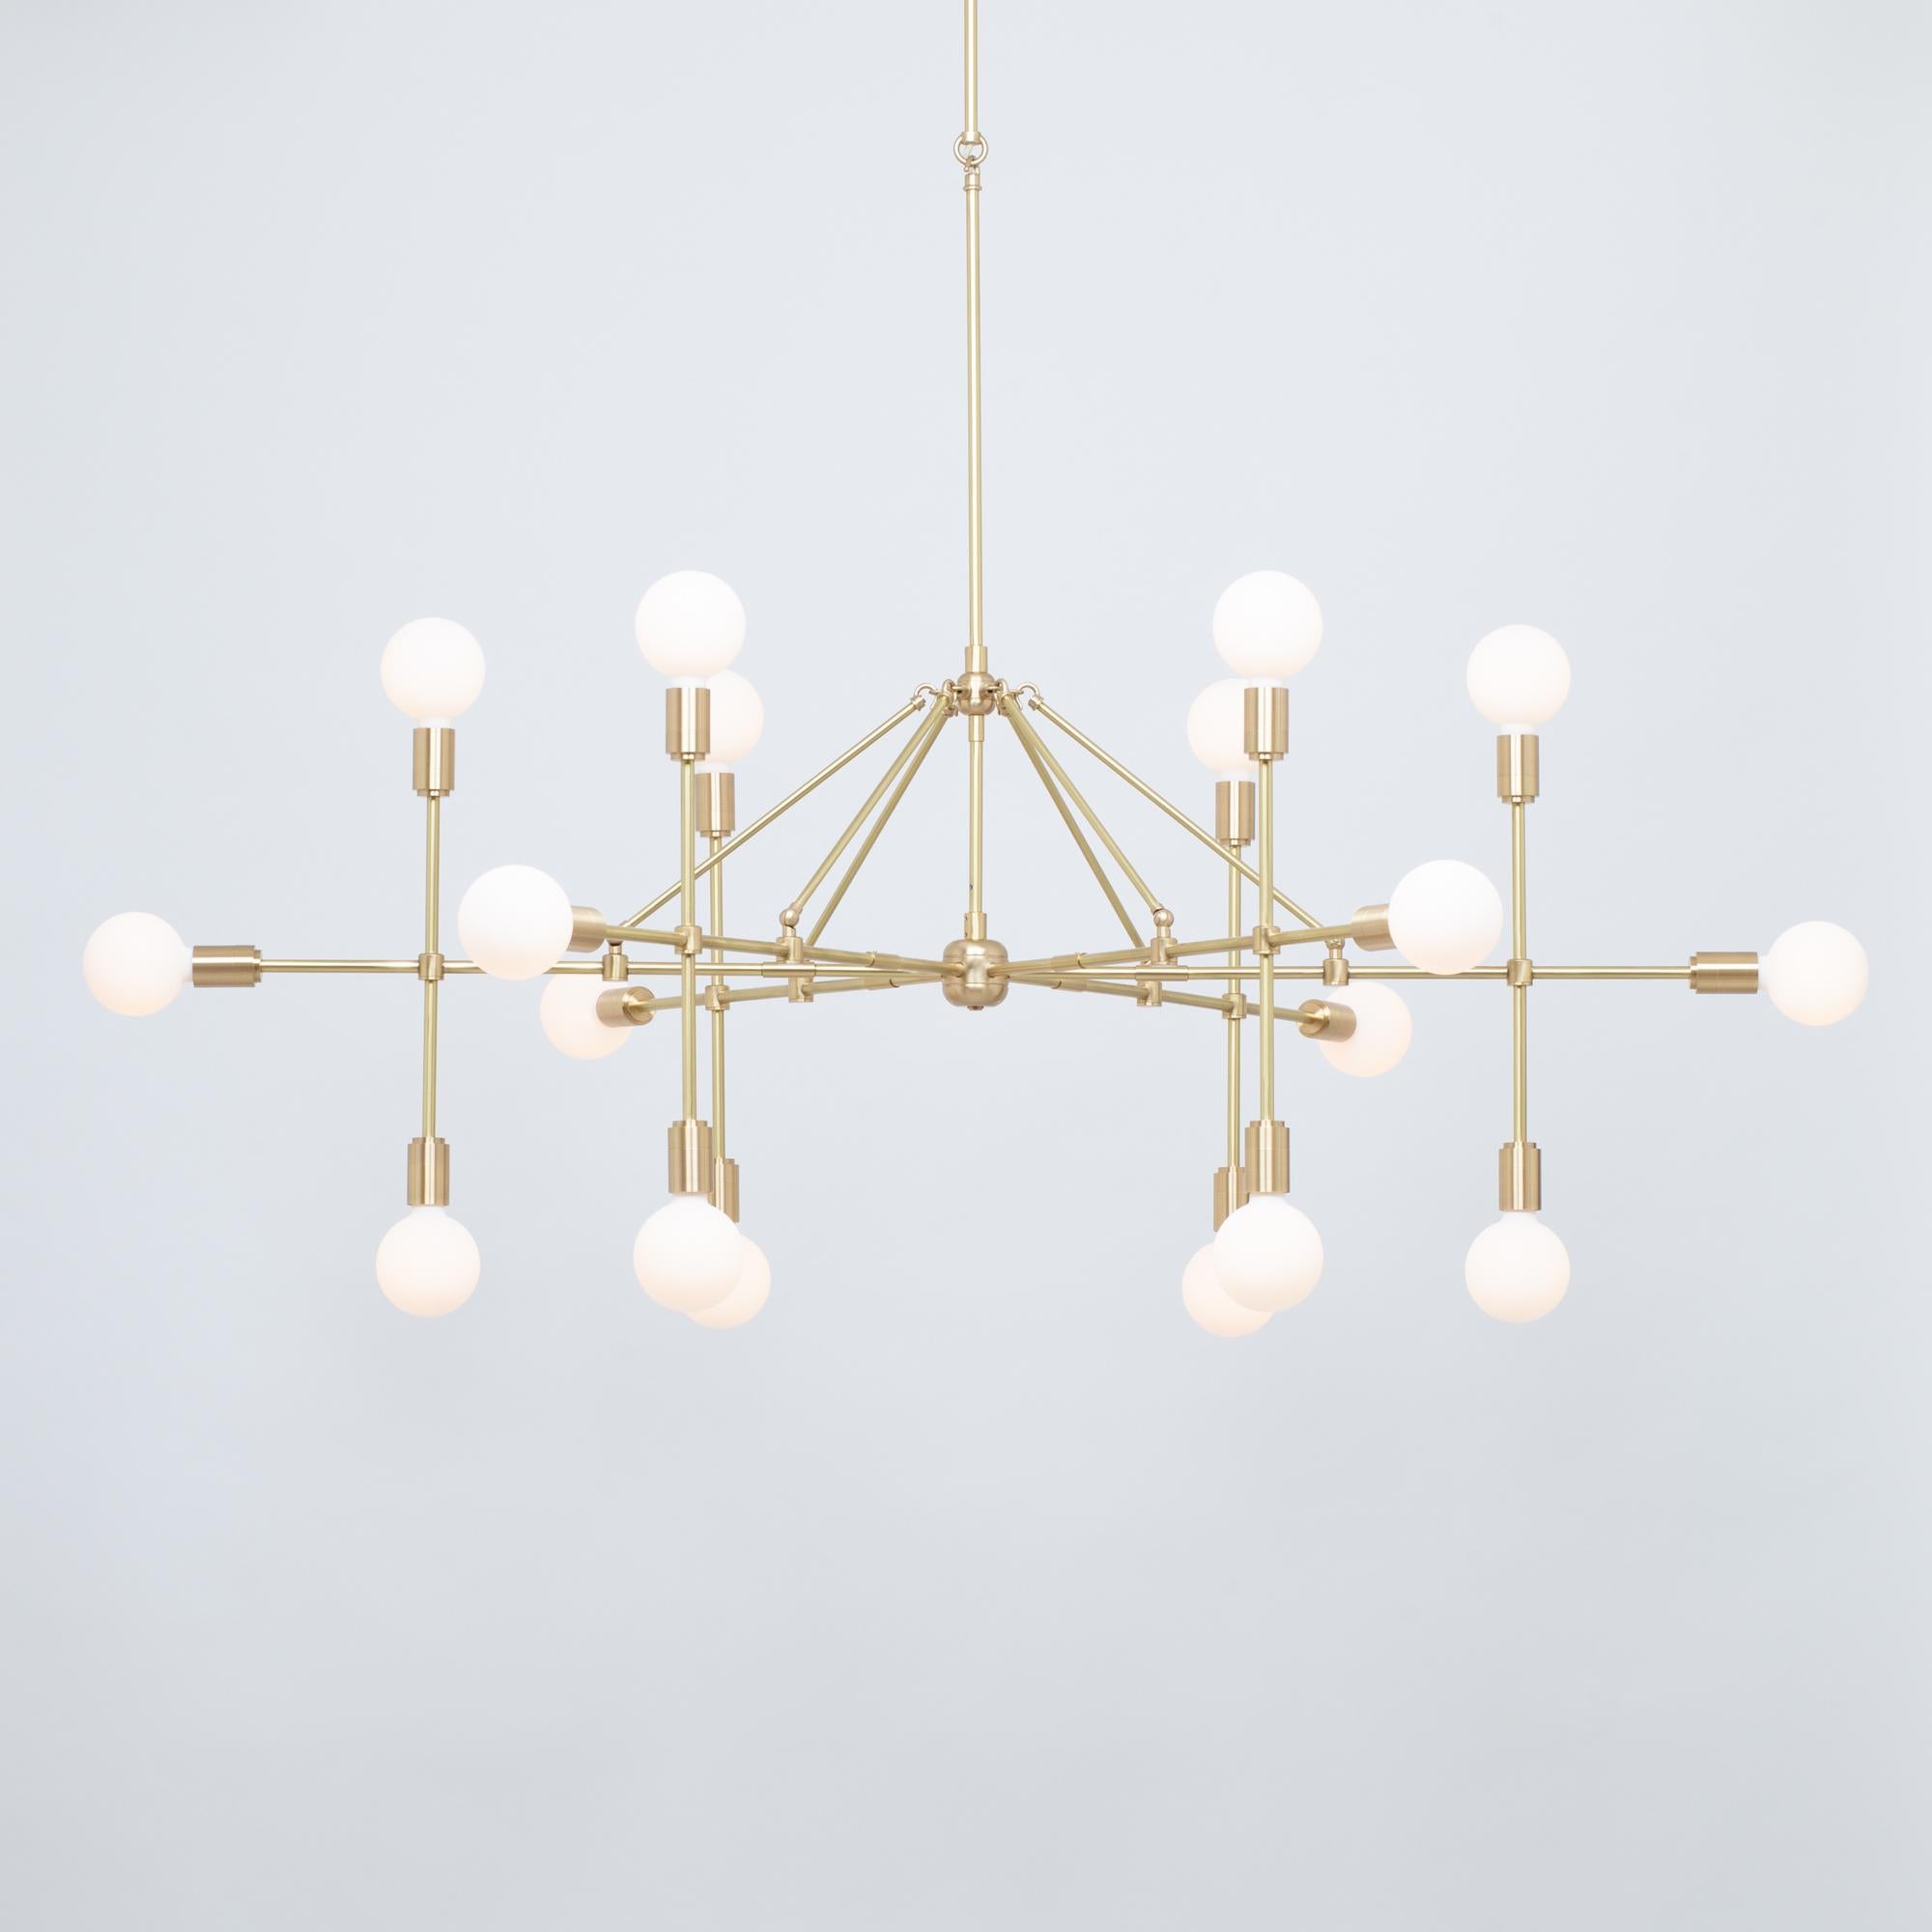 Six Arm Lobby Chandelier
Timeless Art Deco
Solid Brass, Satin Finished, Lacquered 
Eighteen Tala Sphere III Dim to Warm Bulbs.
2000K - 2800K  95CRI
10,800 Dim to Warm Lumens 
Large ø164cm Chandelier
Custom Options and Finishes available on